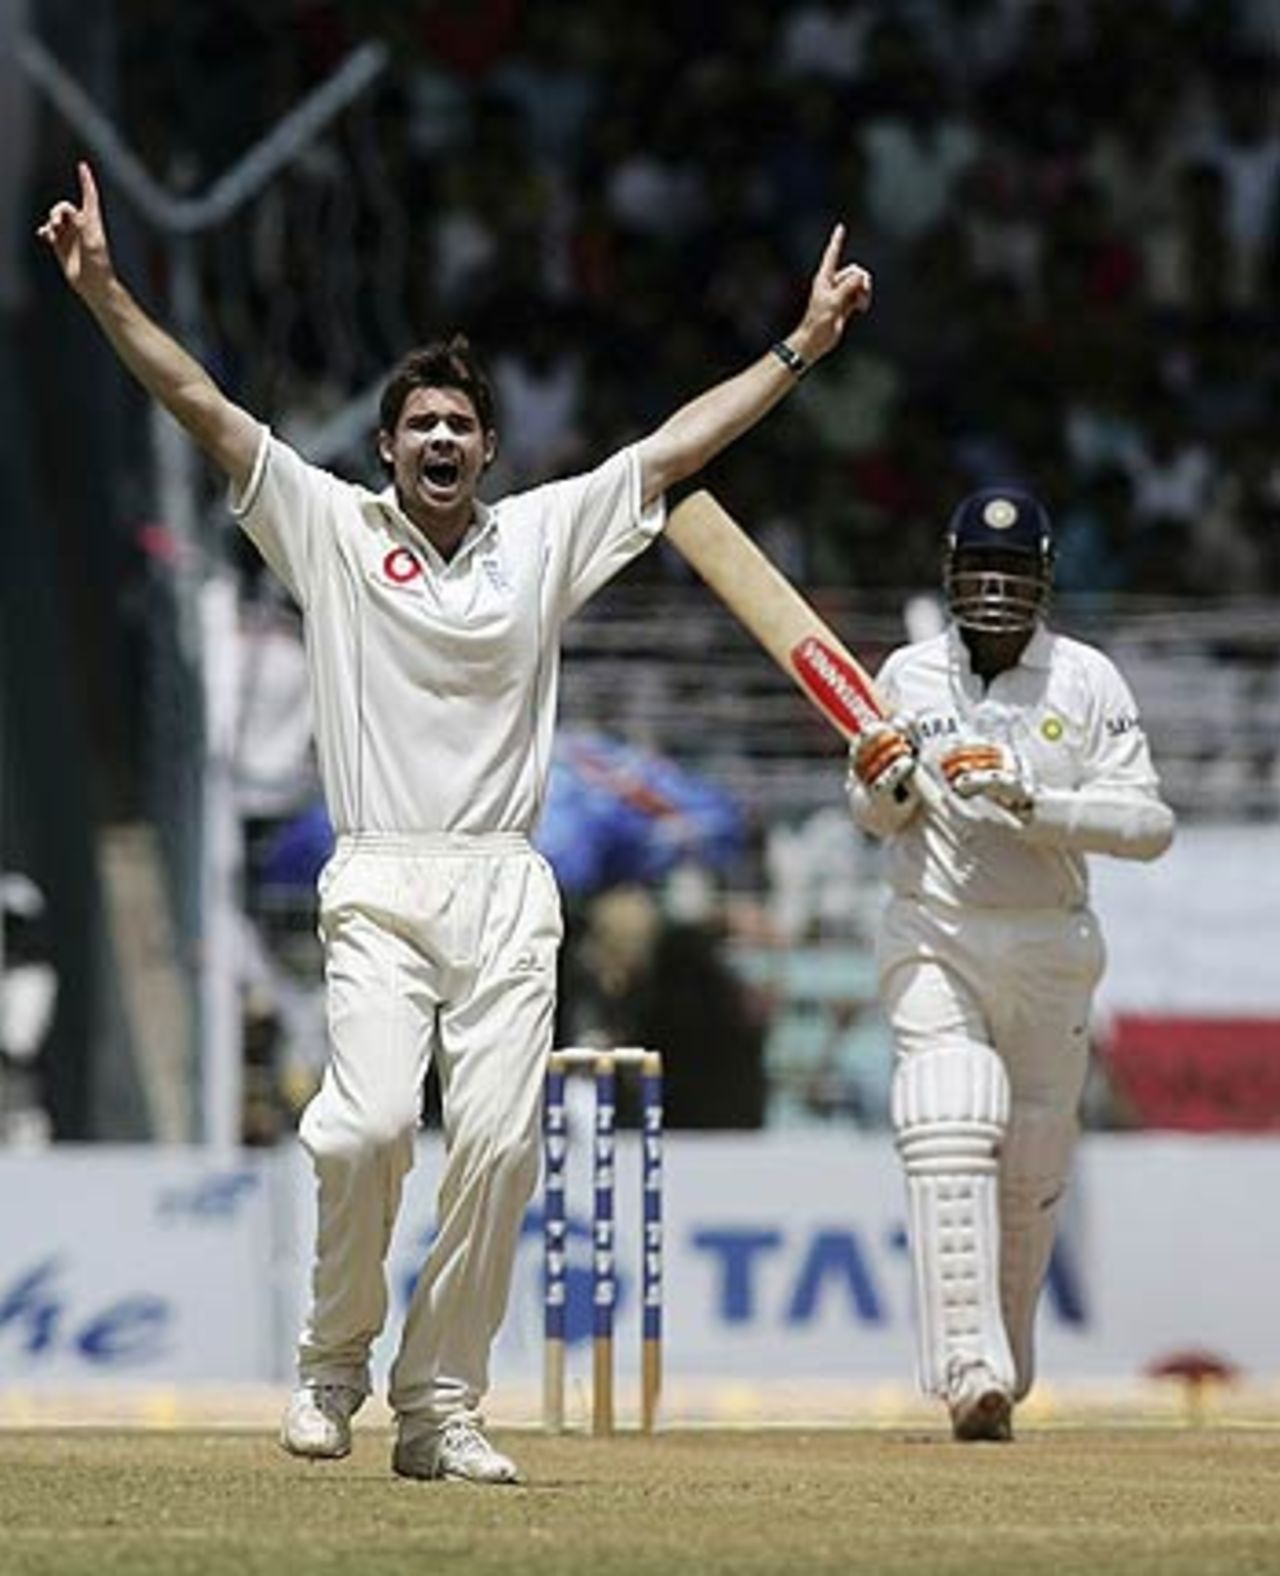 James Anderson traps Virender Sehwag lbw for 0 as India slip to 77 for 6, India v England, 3rd Test, Mumbai, March 22, 2006